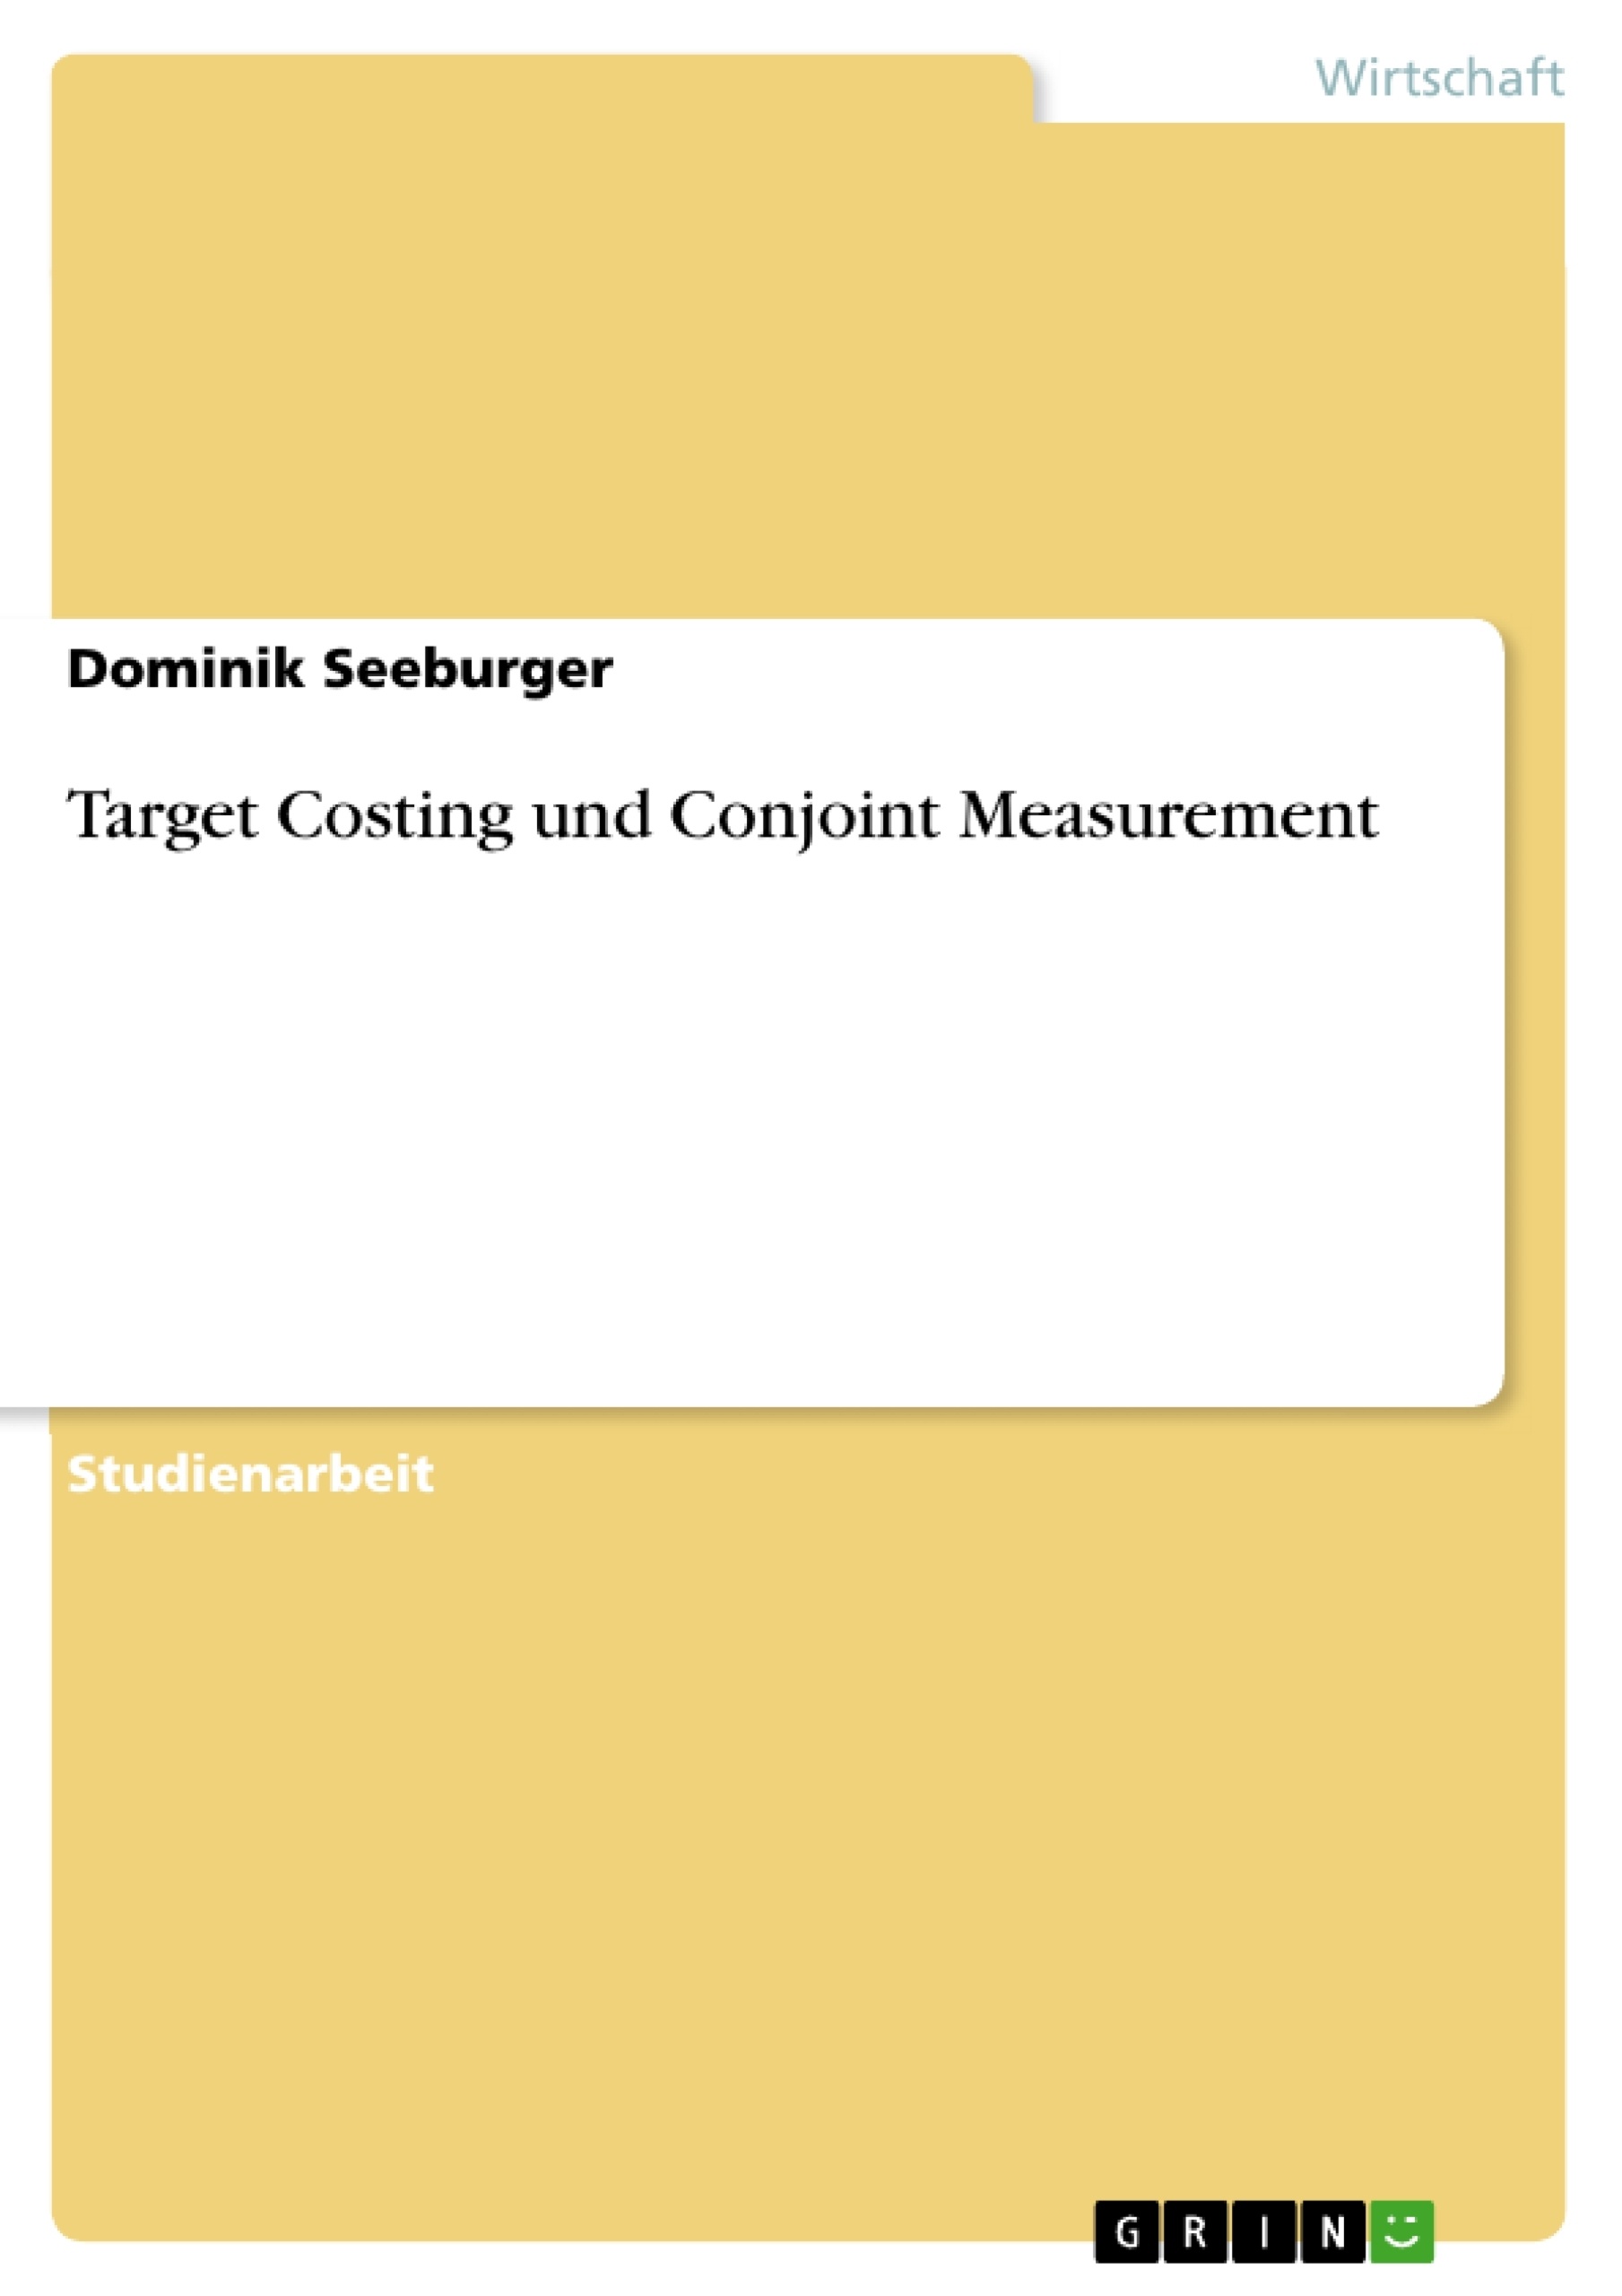 Title: Target Costing und Conjoint Measurement